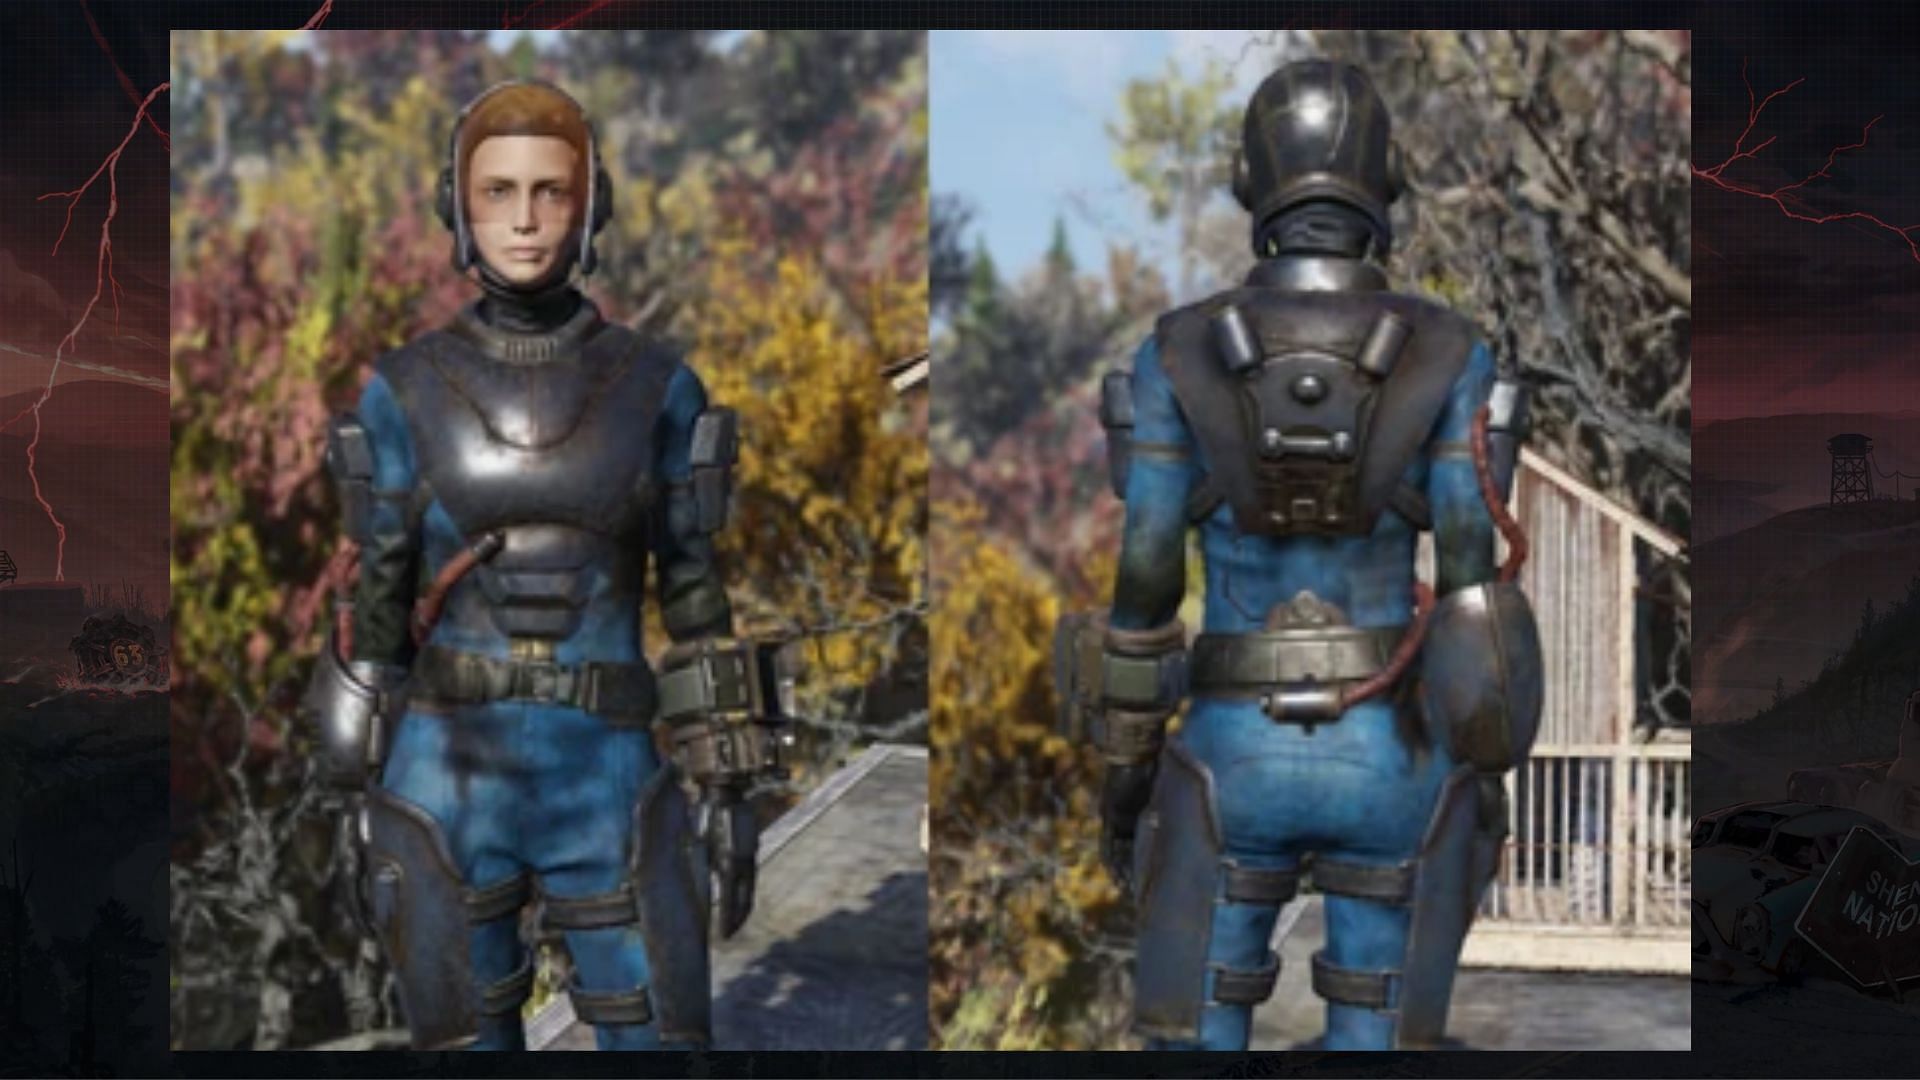 Lost Burnt Vault Suit in Fallout 76 (Image via Bethesda Game Studios)